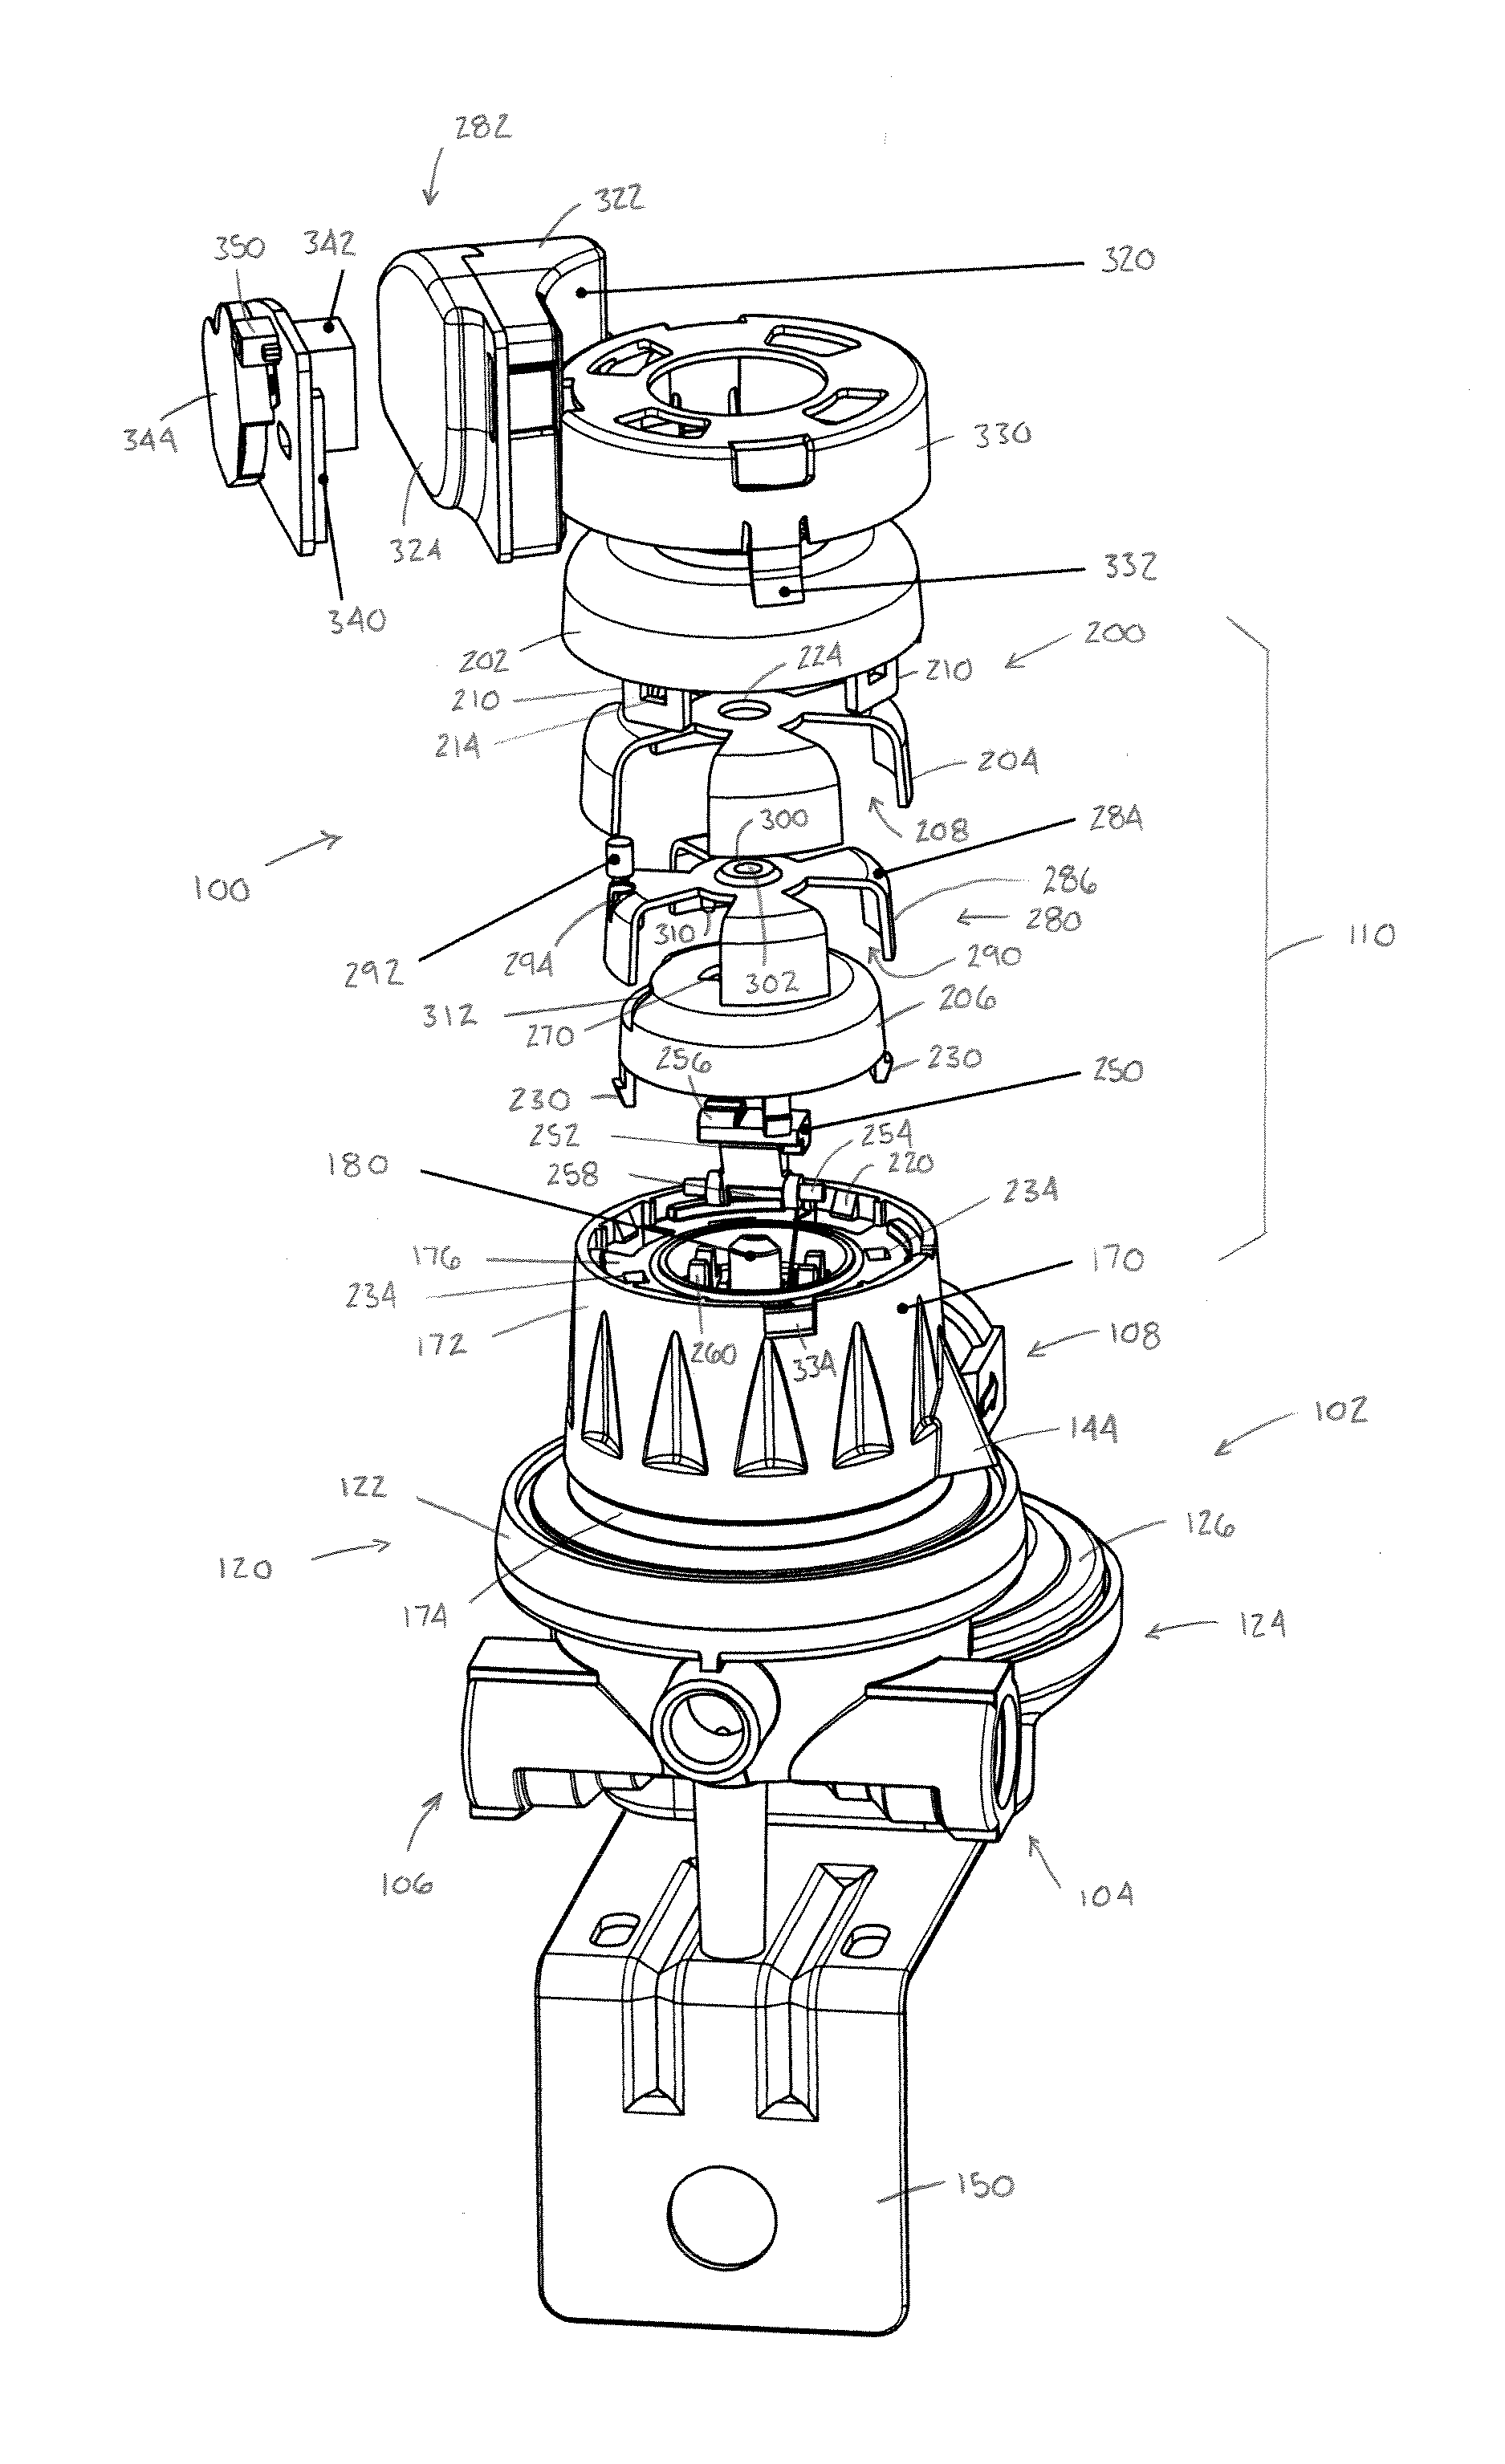 Automatic switching valve with alarm